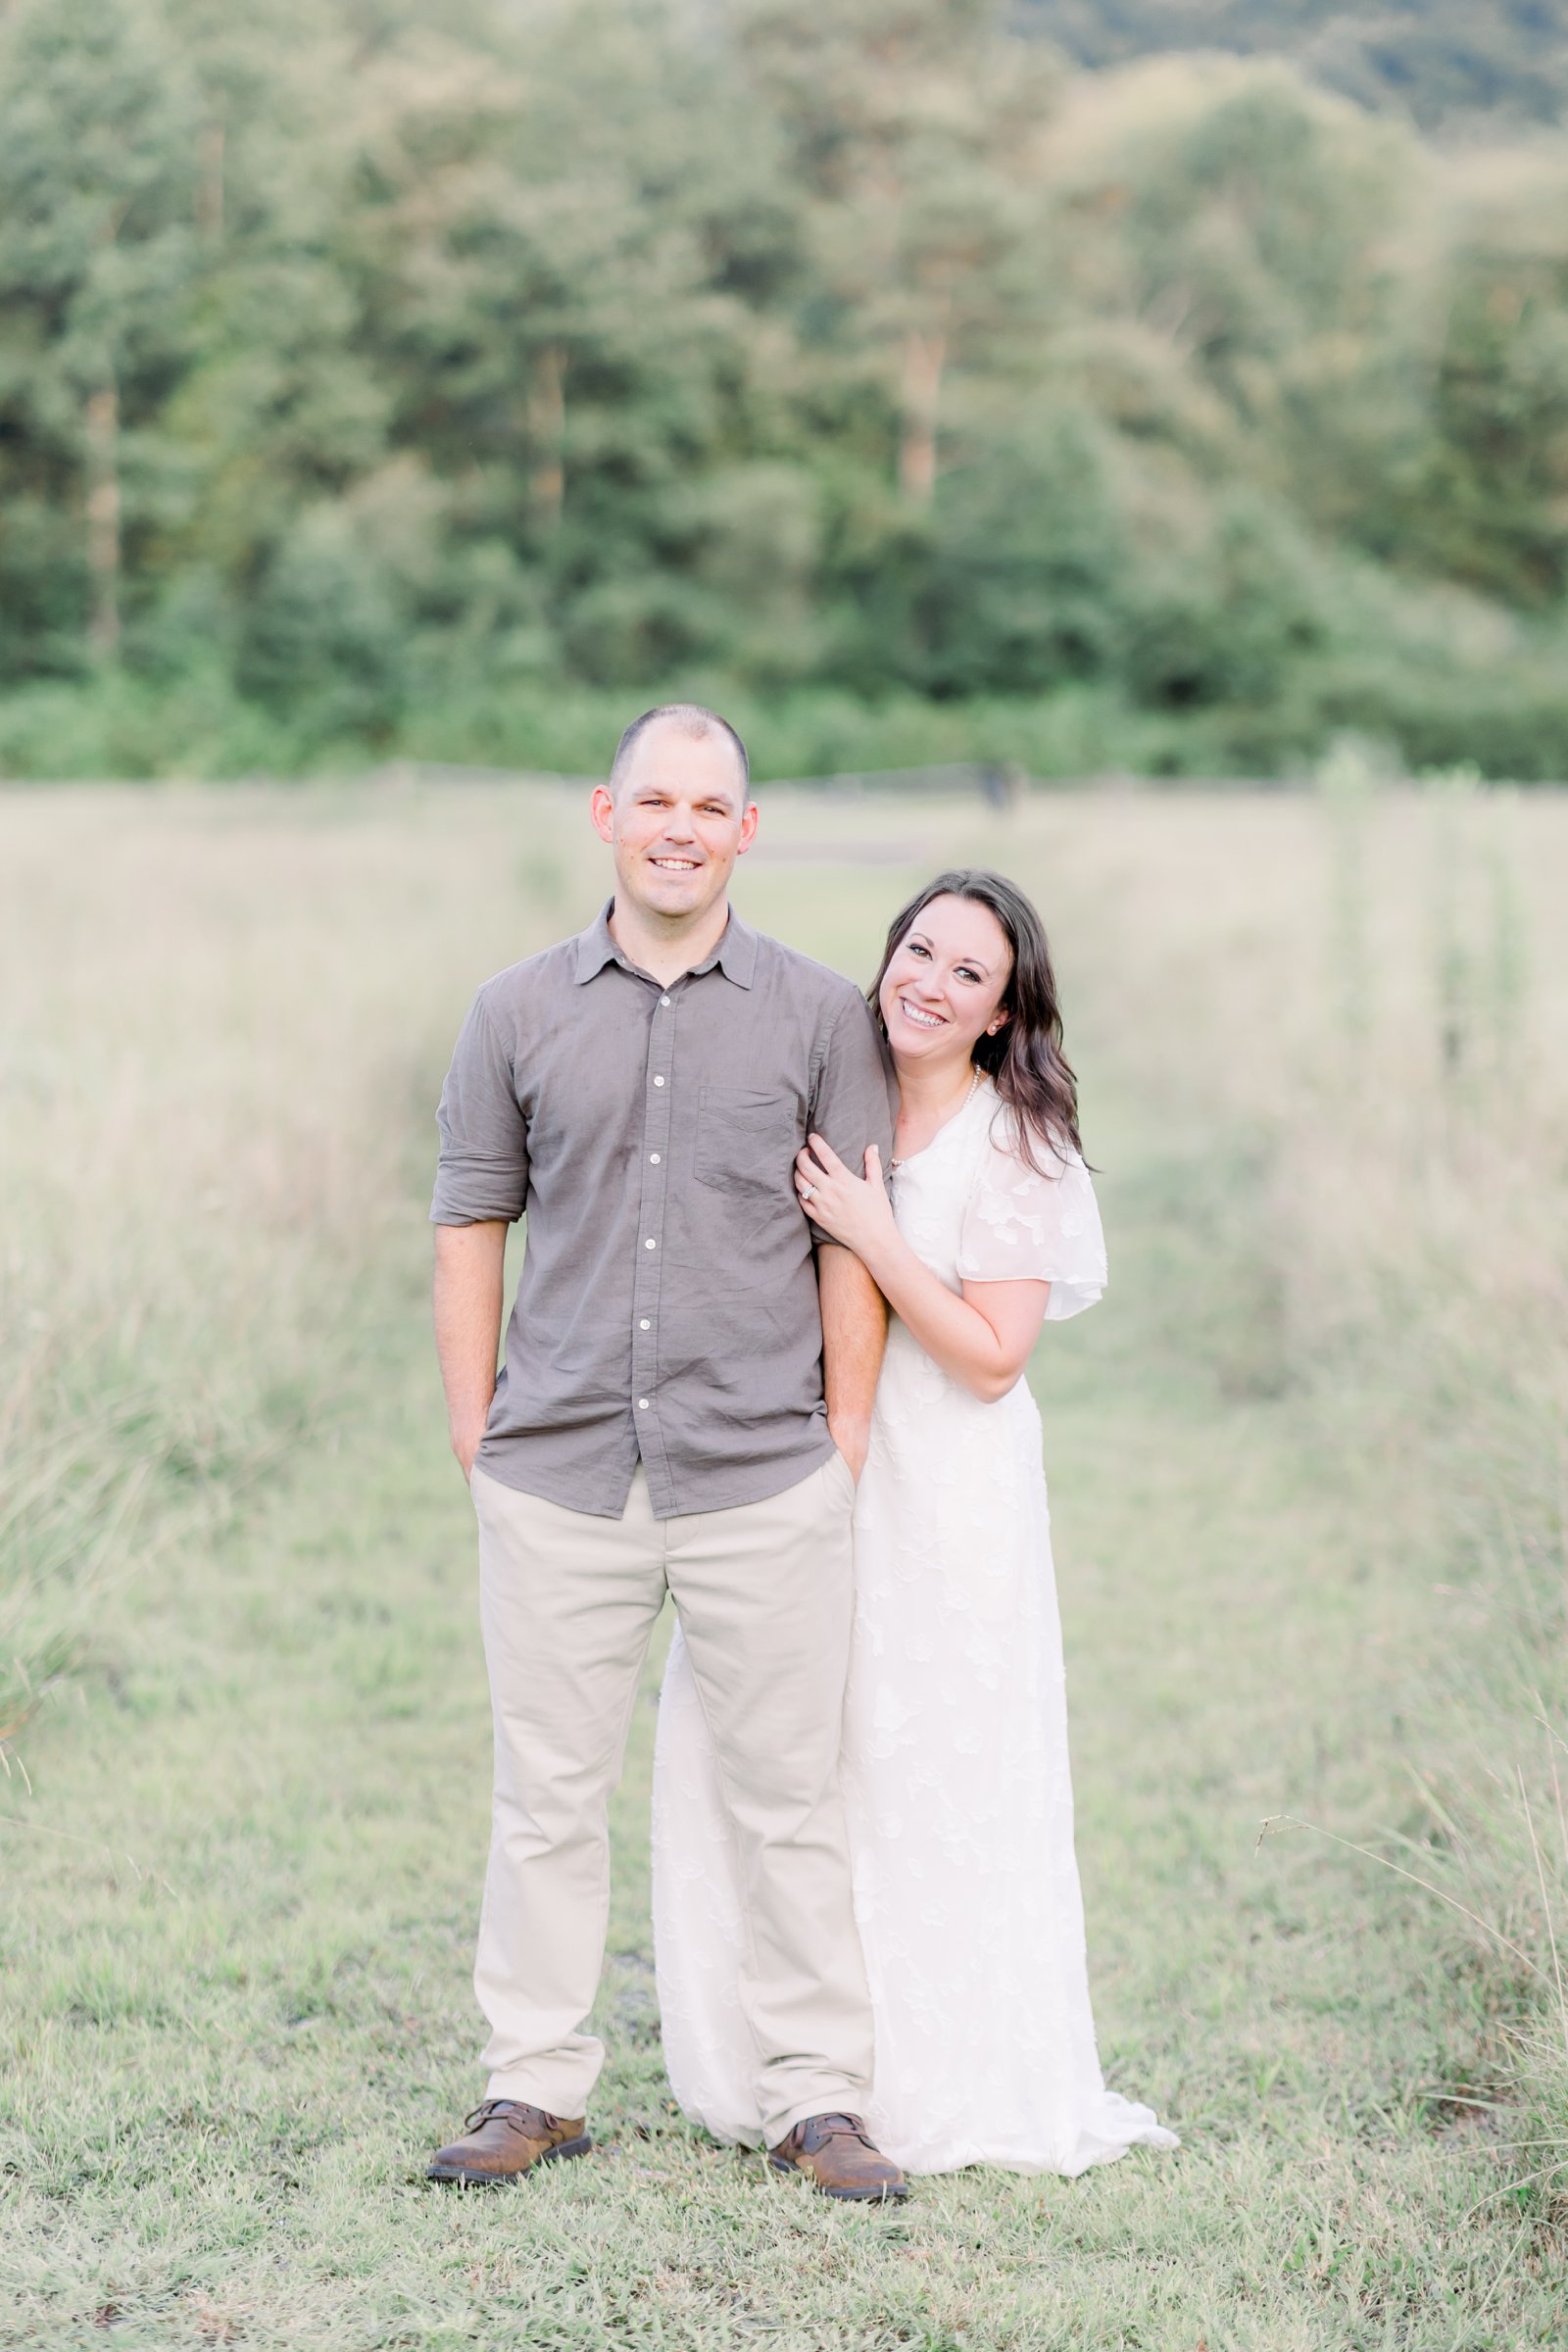 10 Tips from Wedding Photographers for the Chattanooga Bride by Alyssa Rachelle Photography